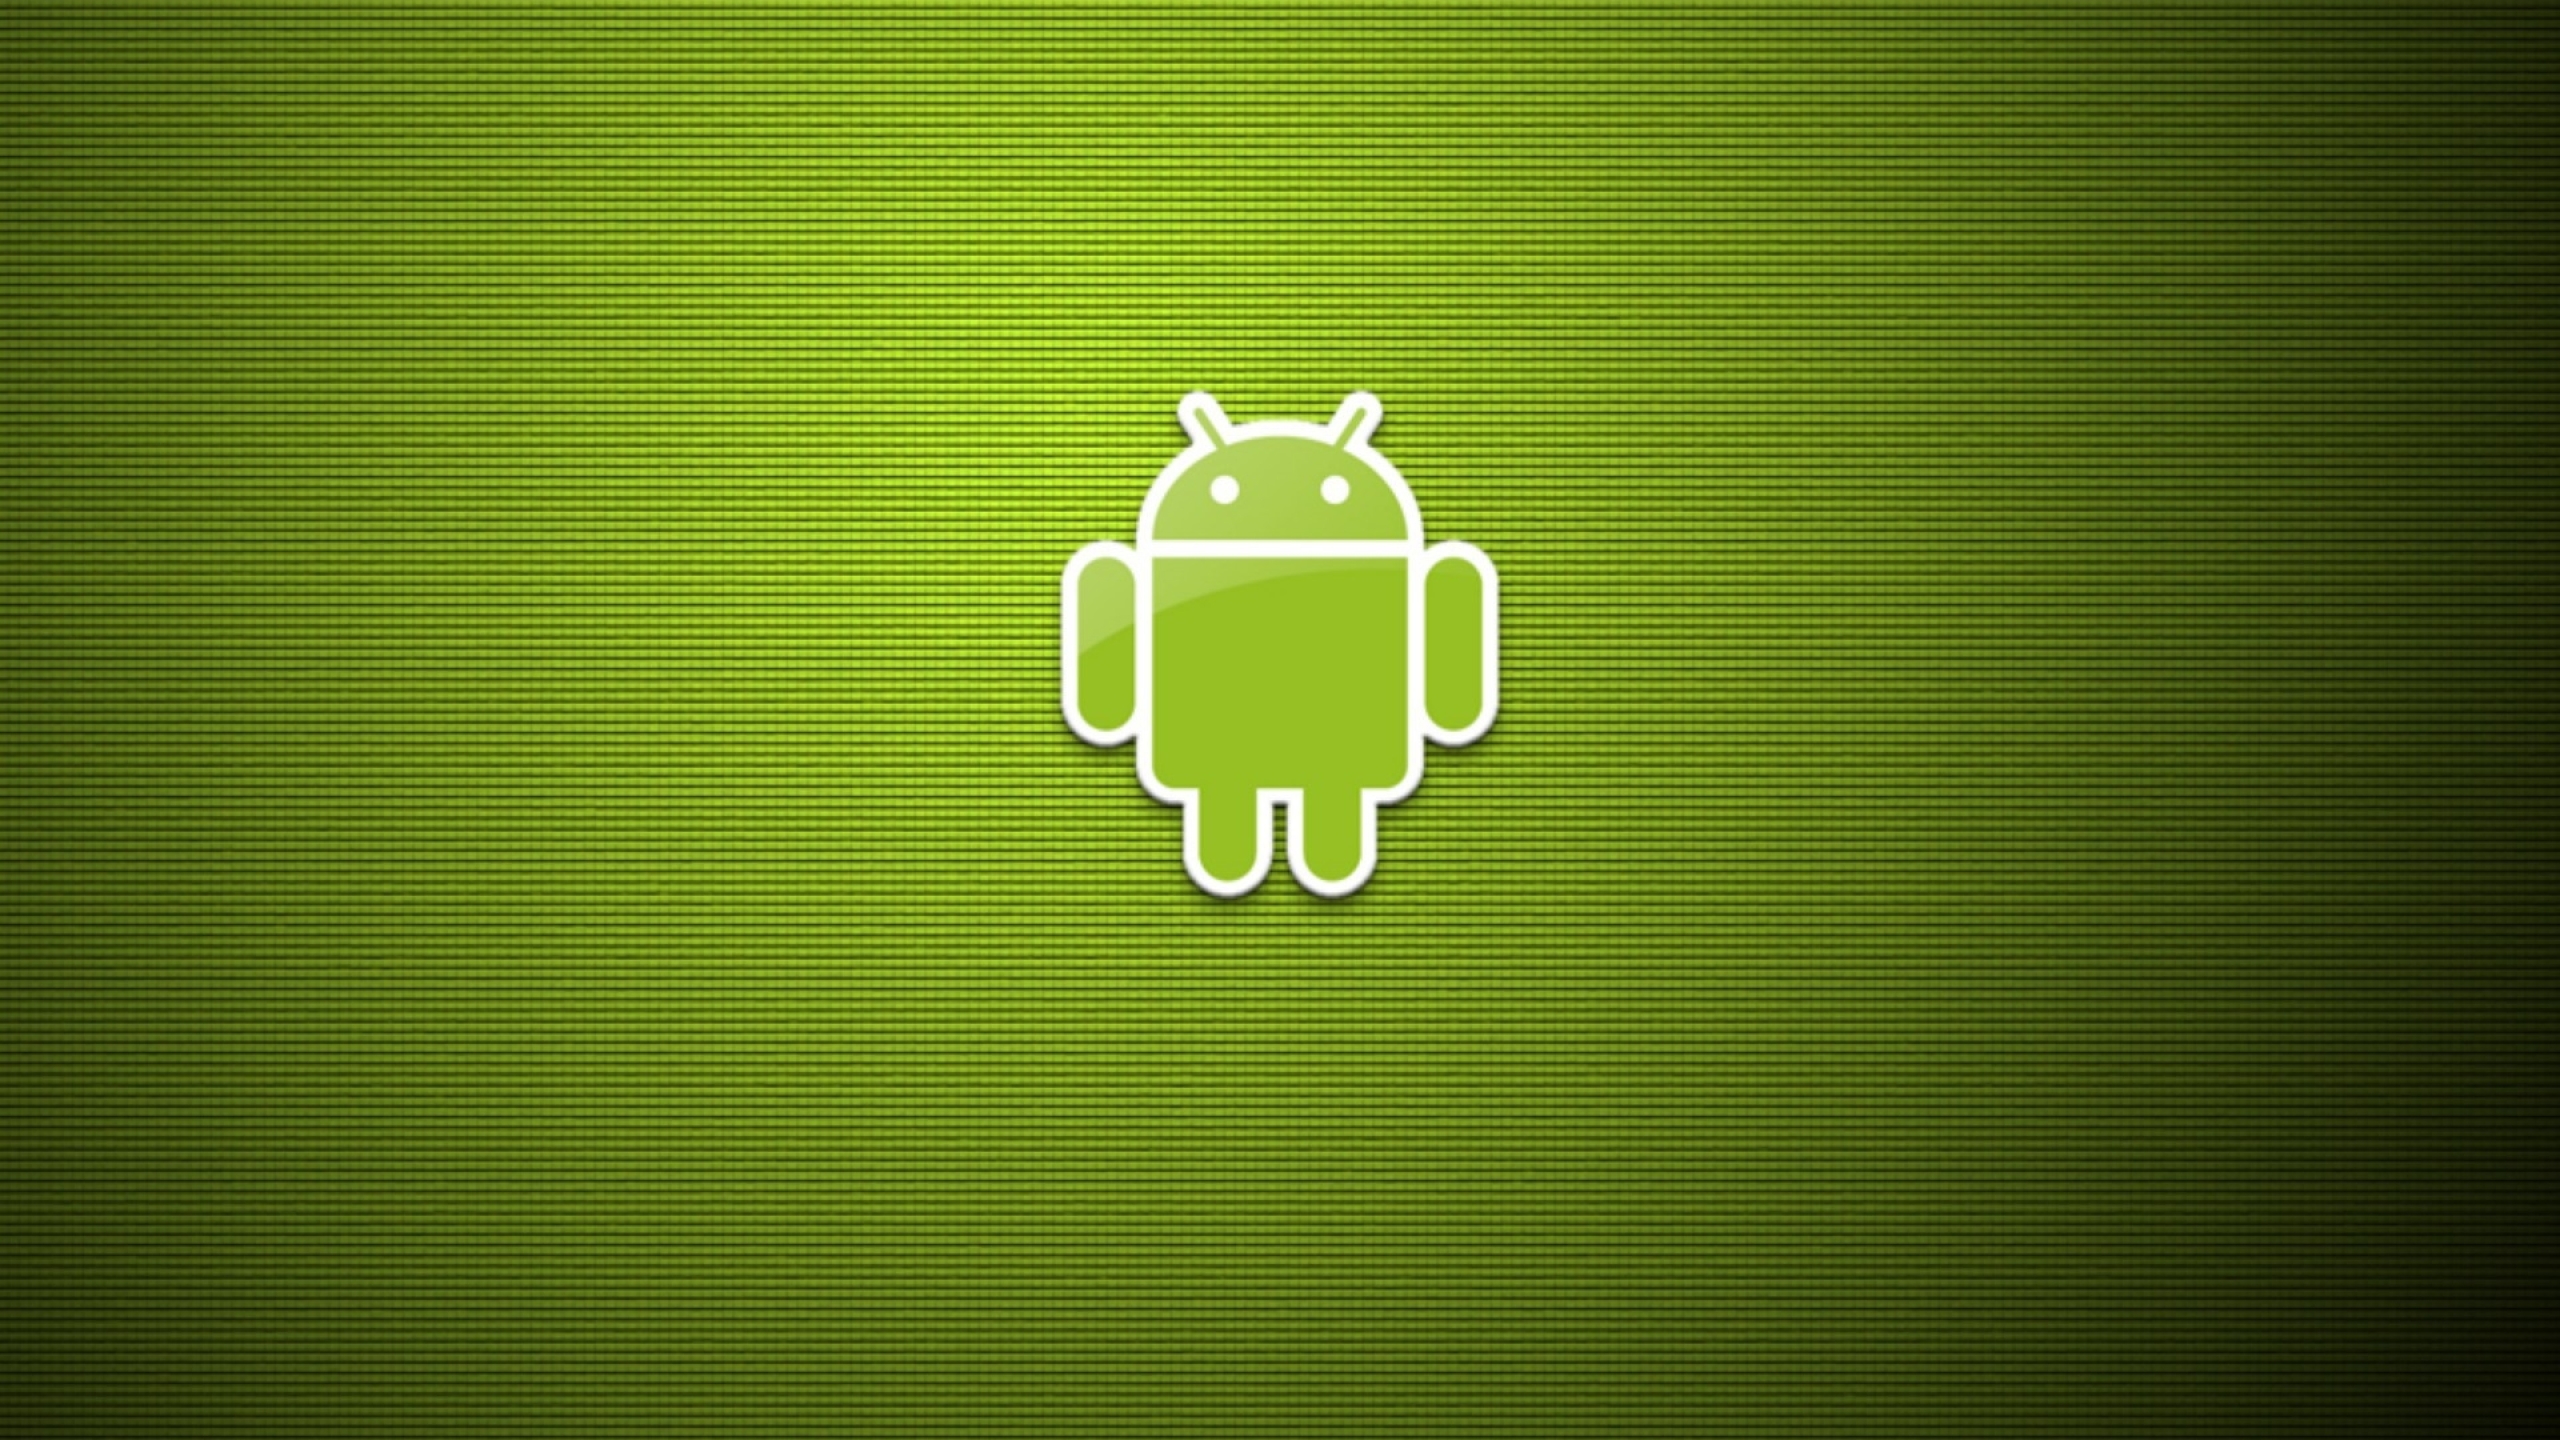 2560x1440 Android Logo Operating System 1440p Resolution Wallpaper Hd Hi Tech 4k Wallpapers Images Photos And Background